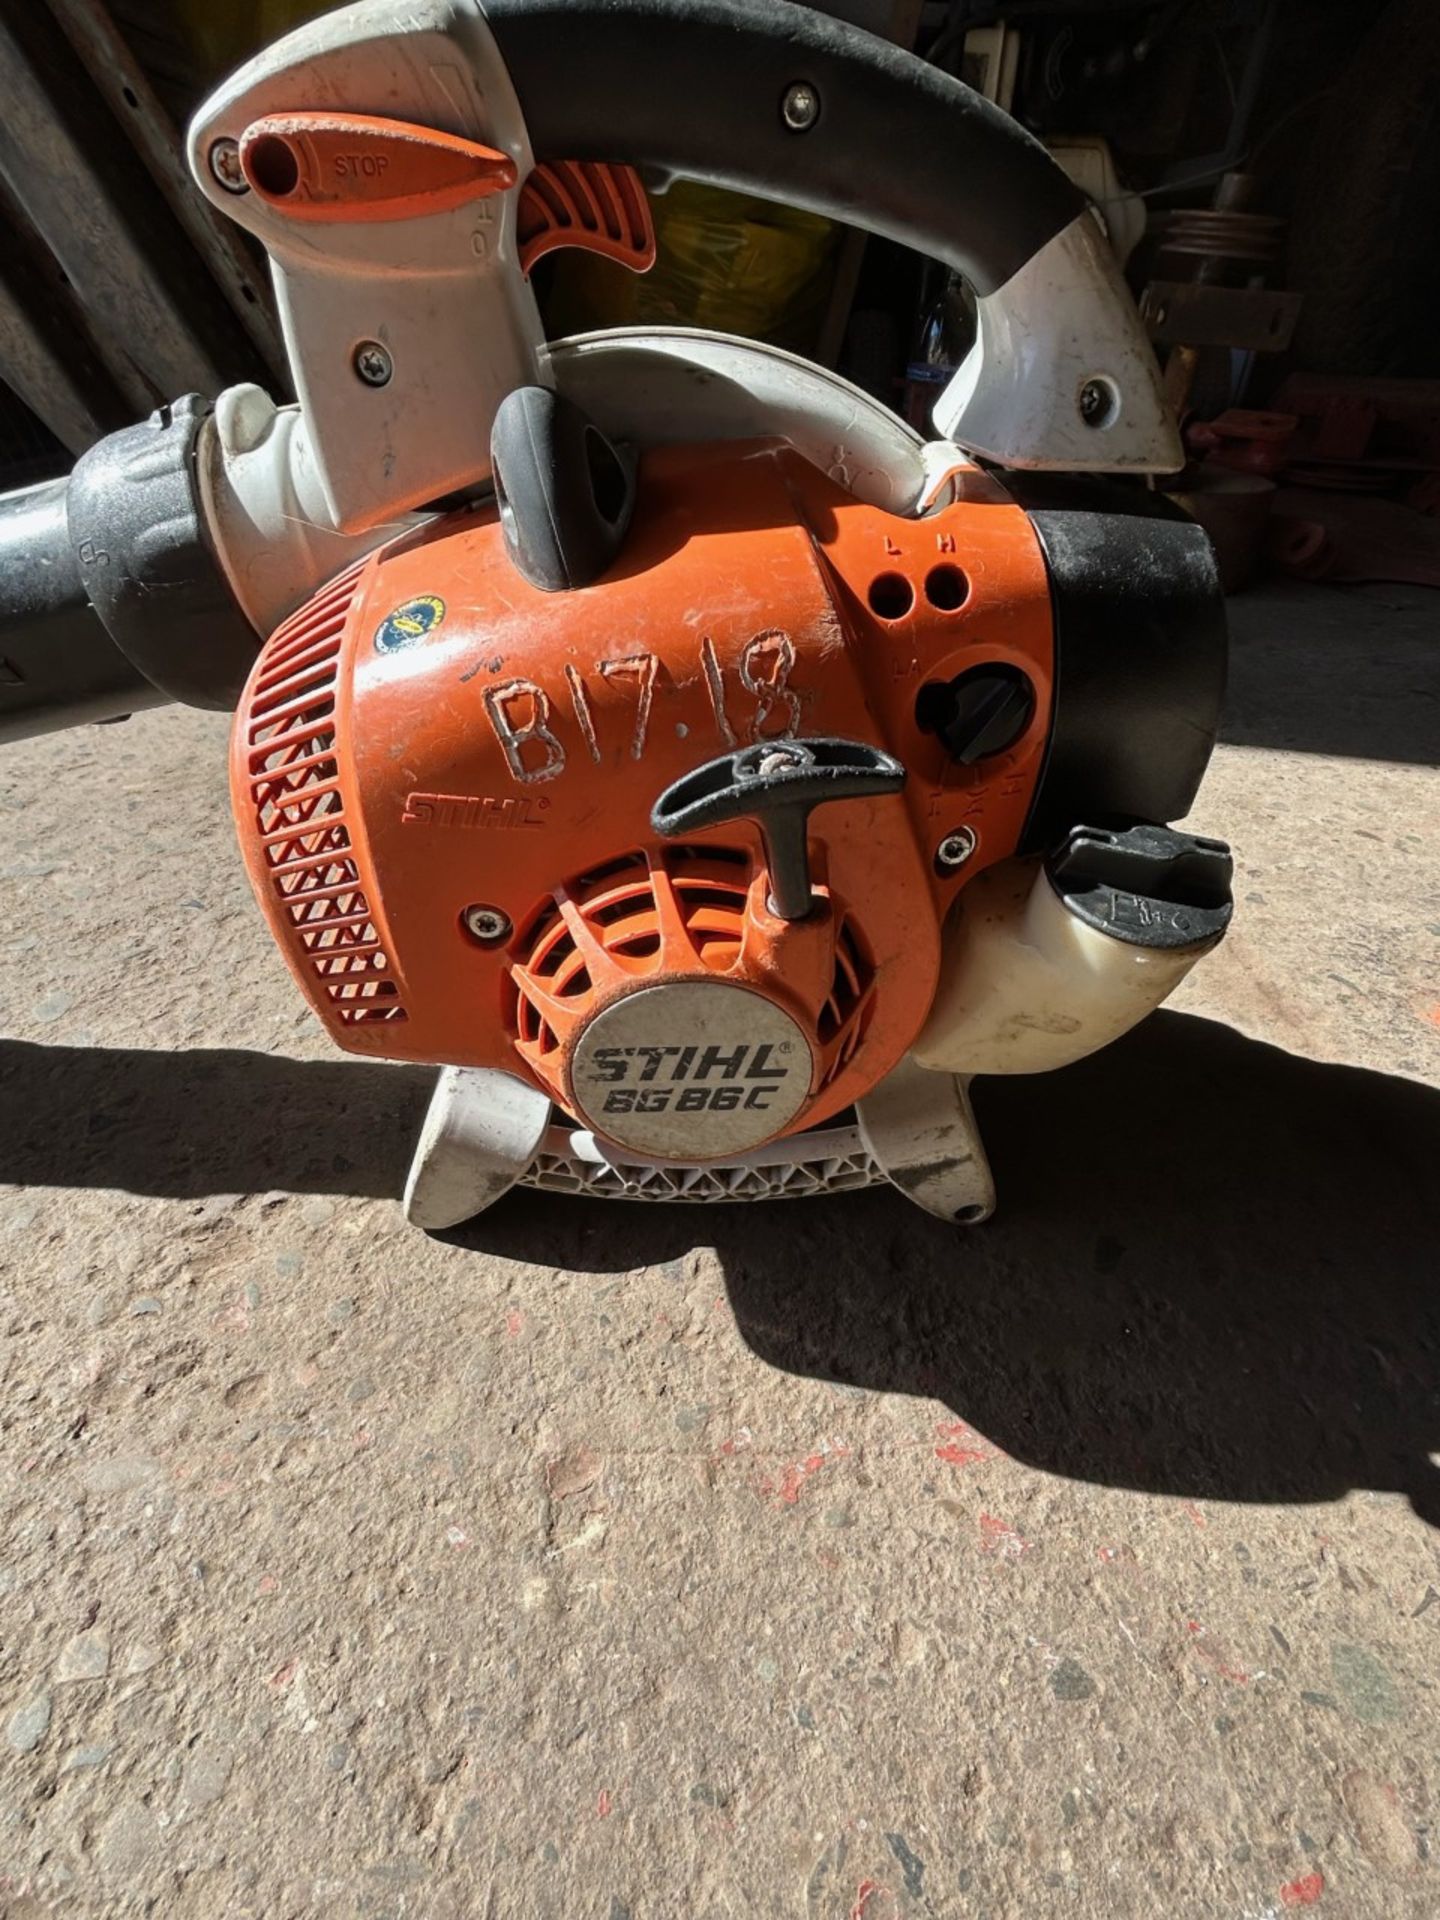 Stihl BG86C blower. Good condition, working order as seen in video - Image 3 of 4